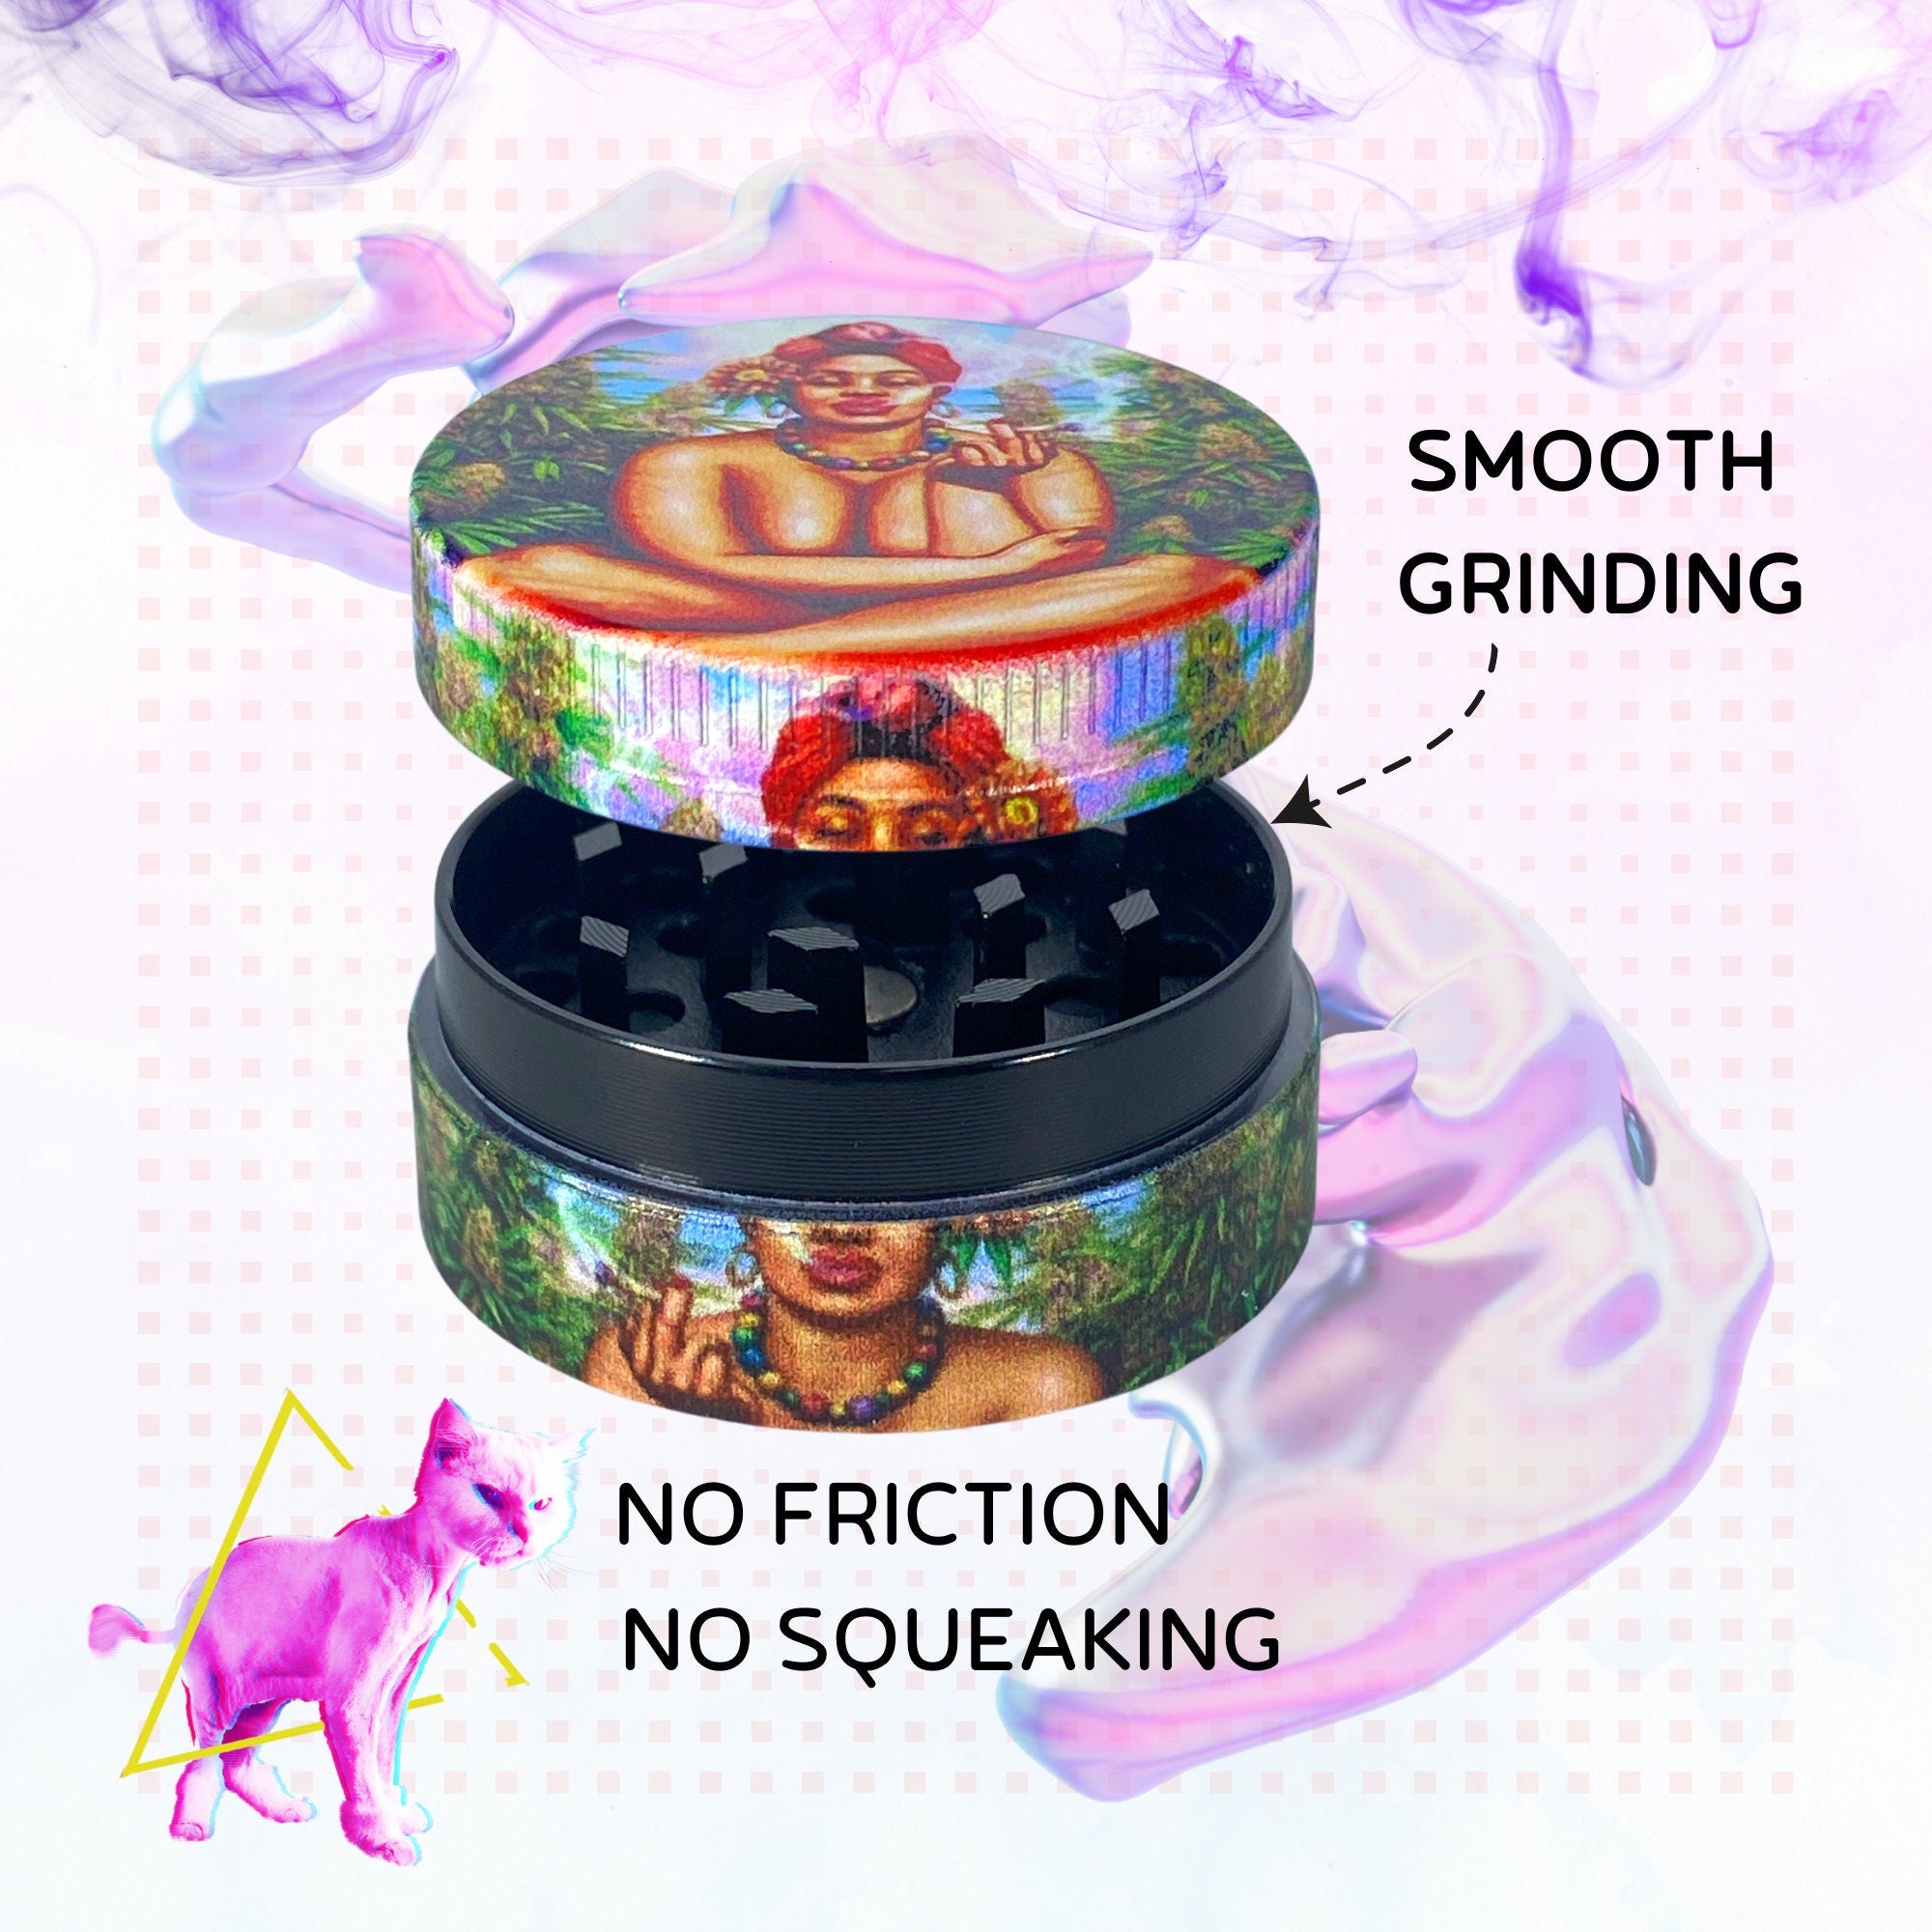 Weed Grinder | African Cool Funny, Men marijuana, cannabis grinders, accessories, 4 piece,fine cannabis, Frida Kahlo, Trippy Herb Girly bong